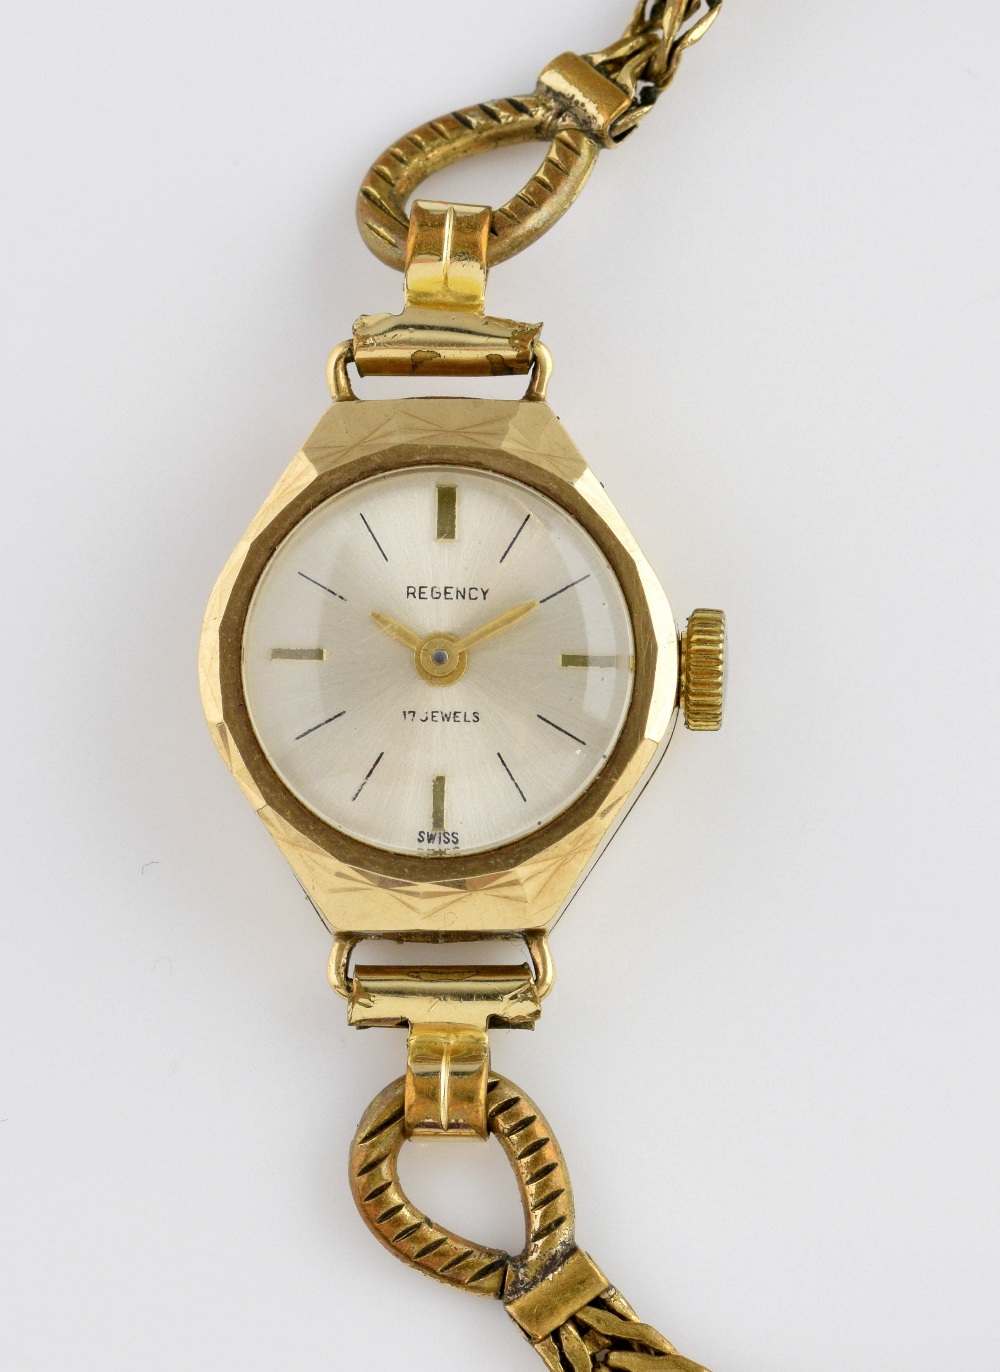 Ladies Regency wrist watch, round dial with baton hour markers, in yellow metal case and rolled gold